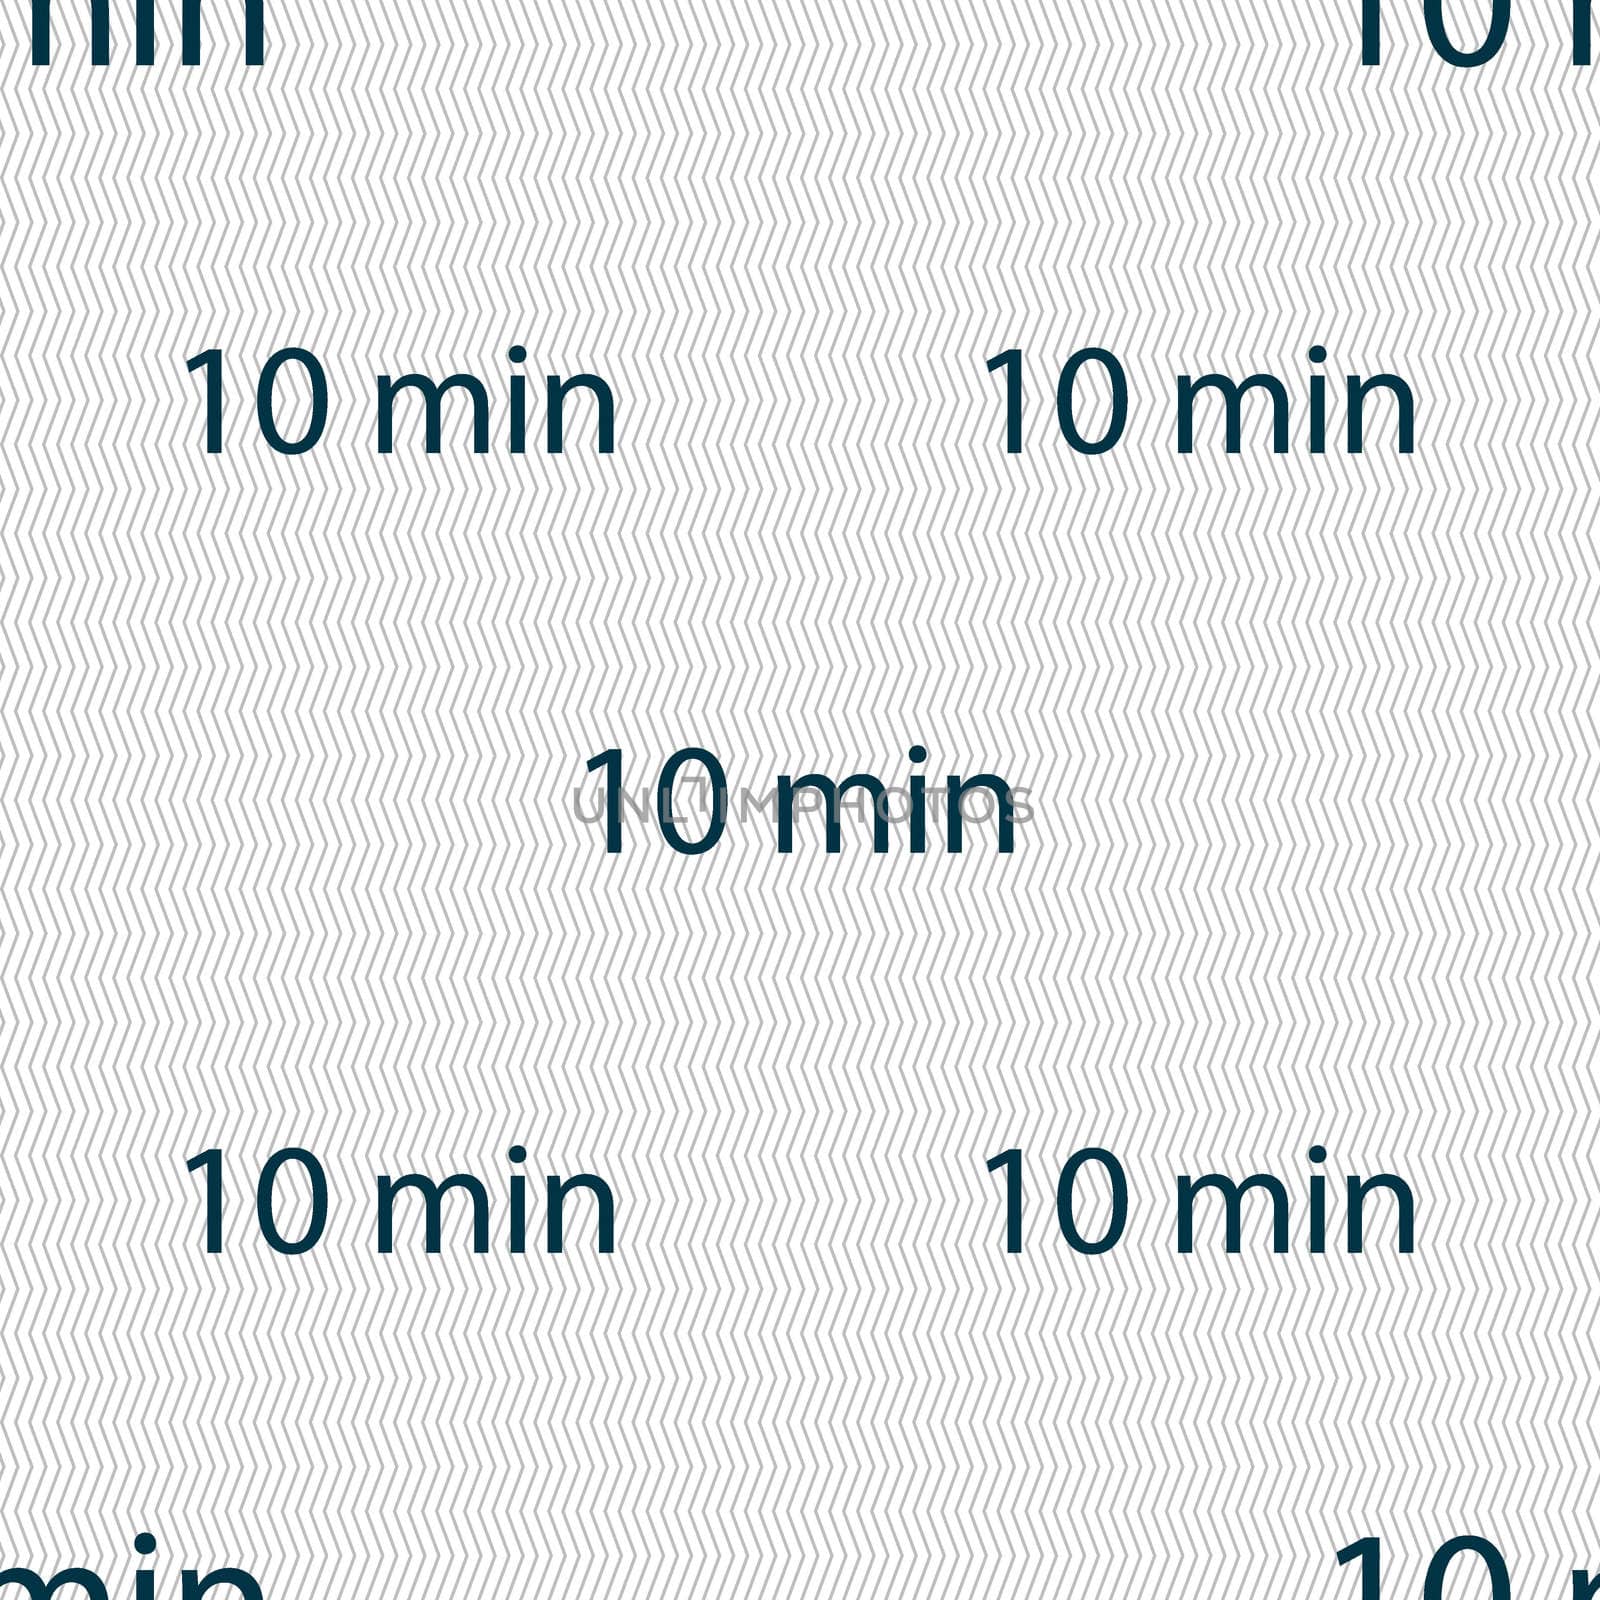 10 minutes sign icon. Seamless abstract background with geometric shapes. illustration